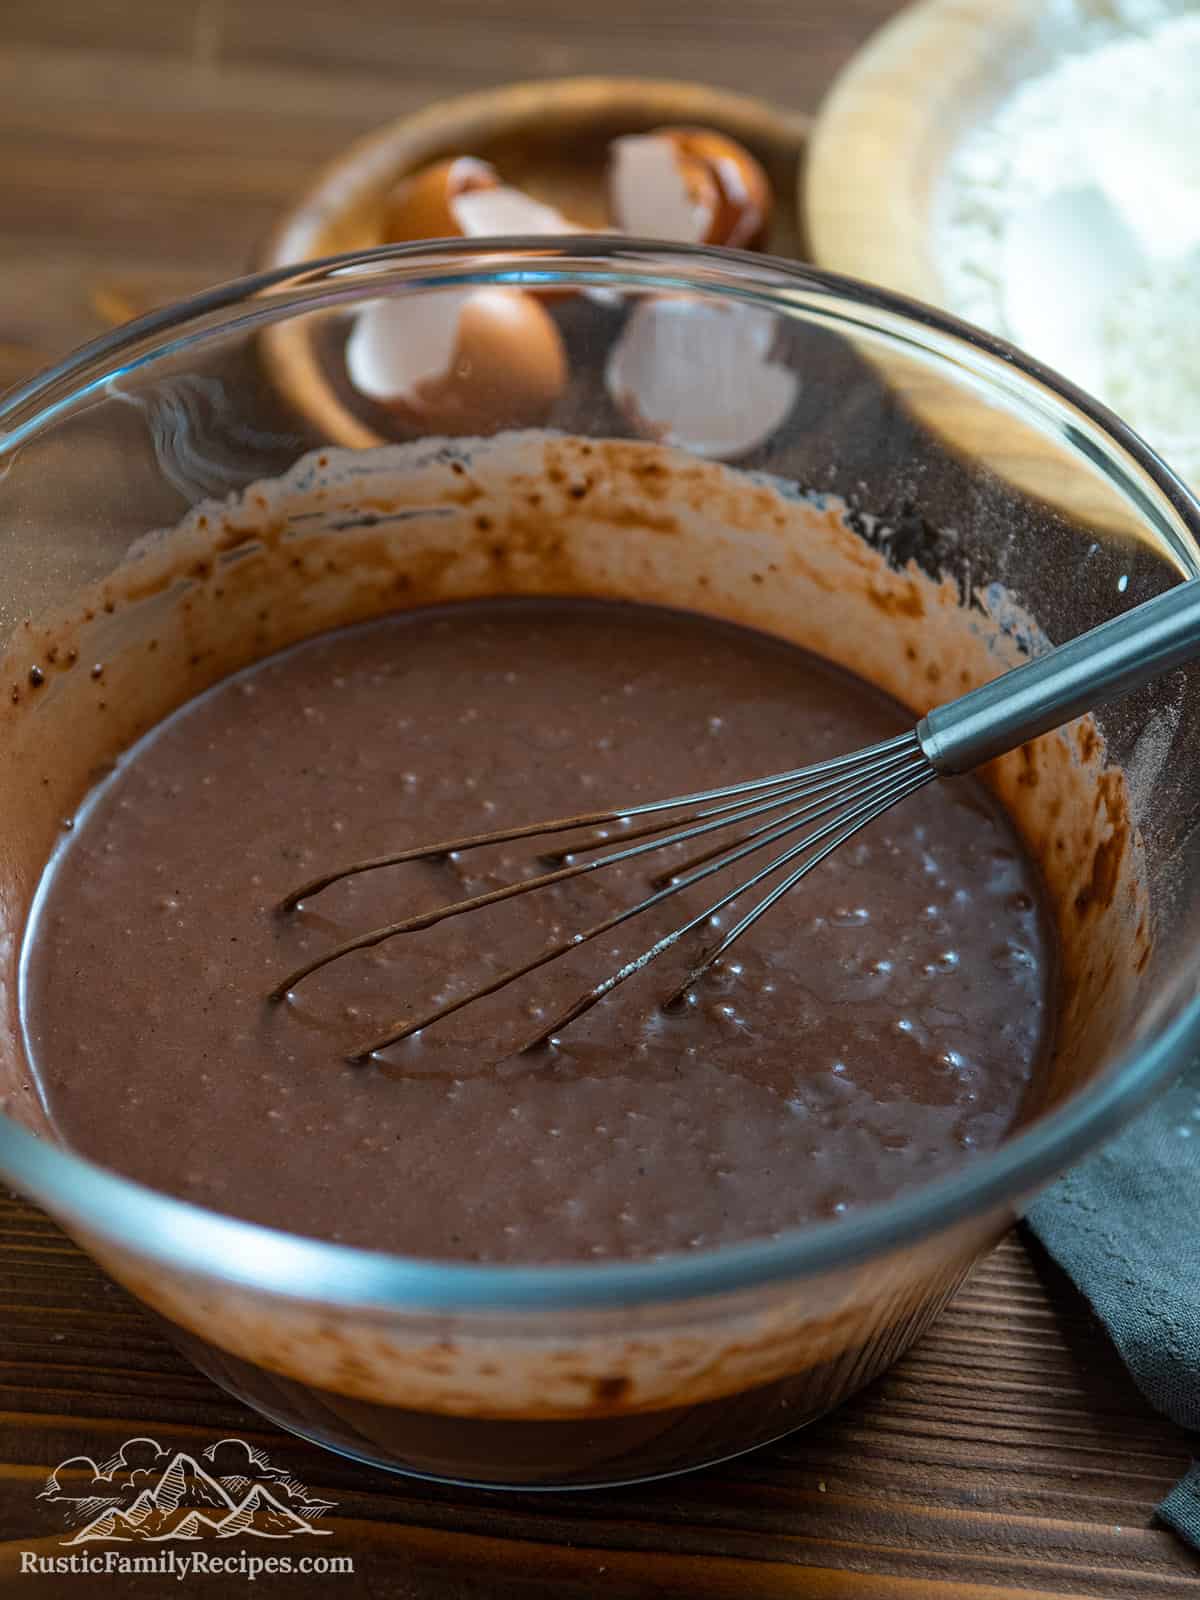 Mixing chocolate pancake batter in a glass bowl